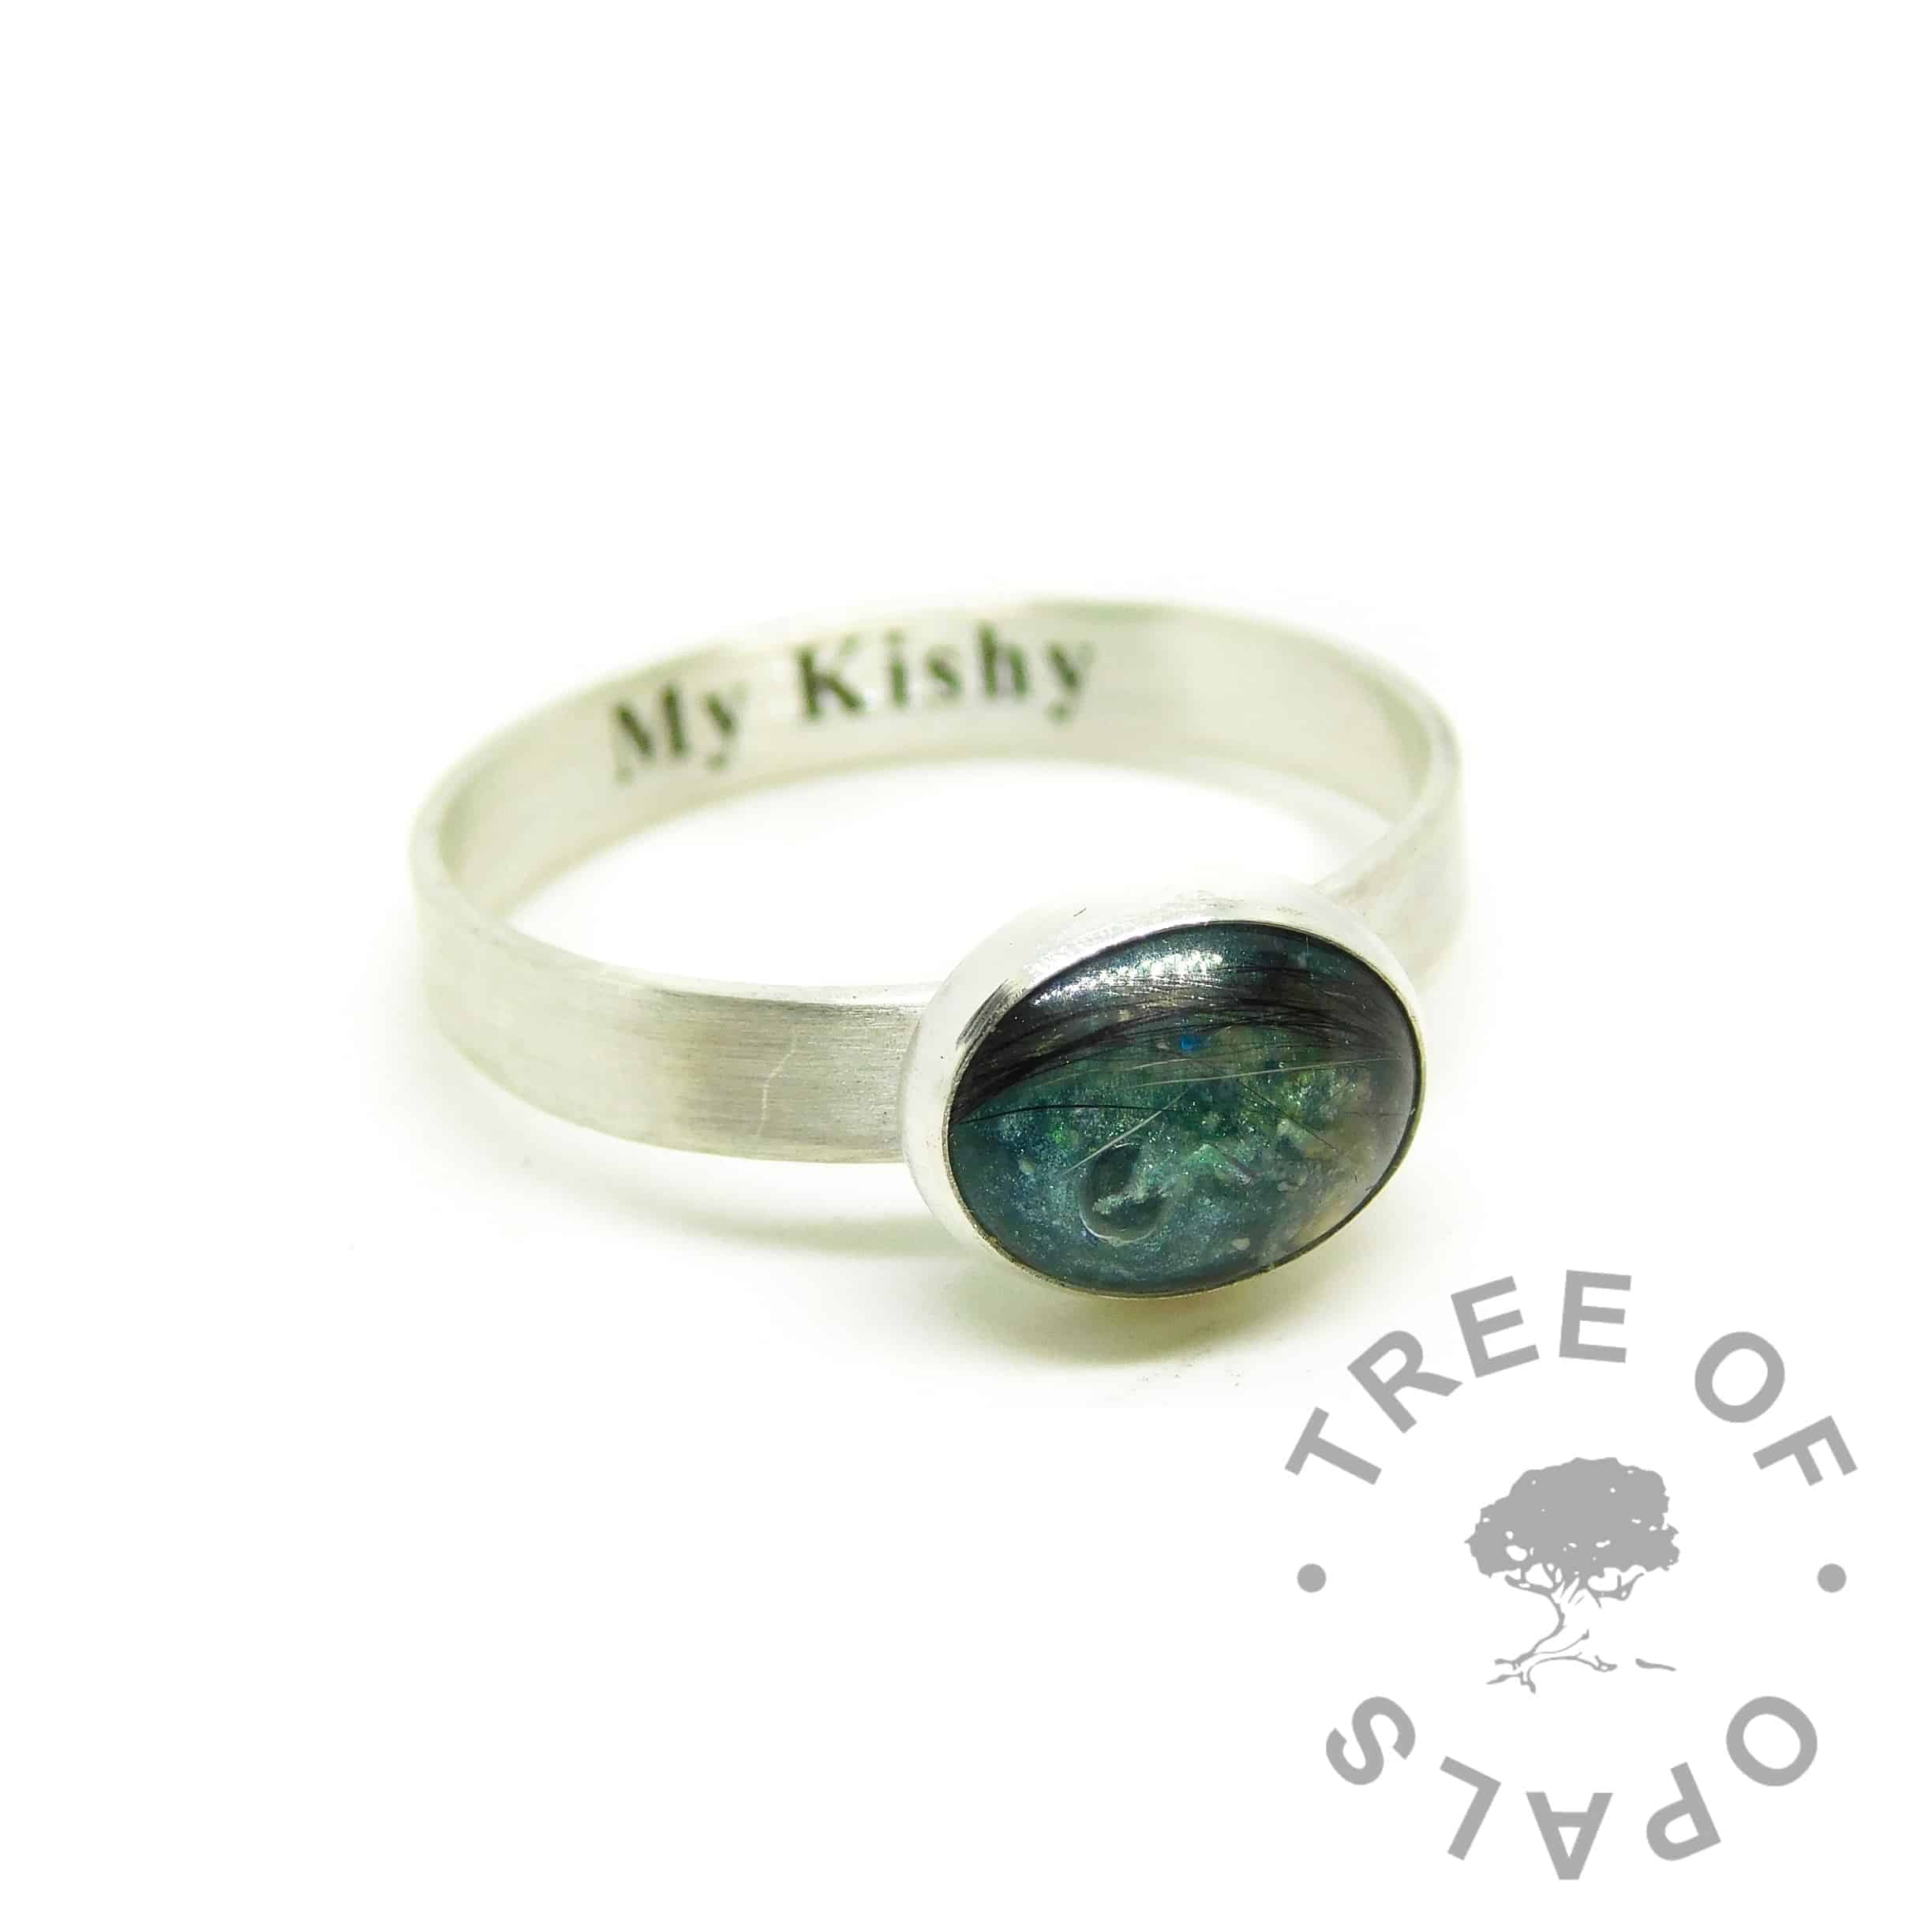 teal engraved fur ring, engraved with Times New Roman font on the inside of the band. Brushed band, mermaid teal resin sparkle mix